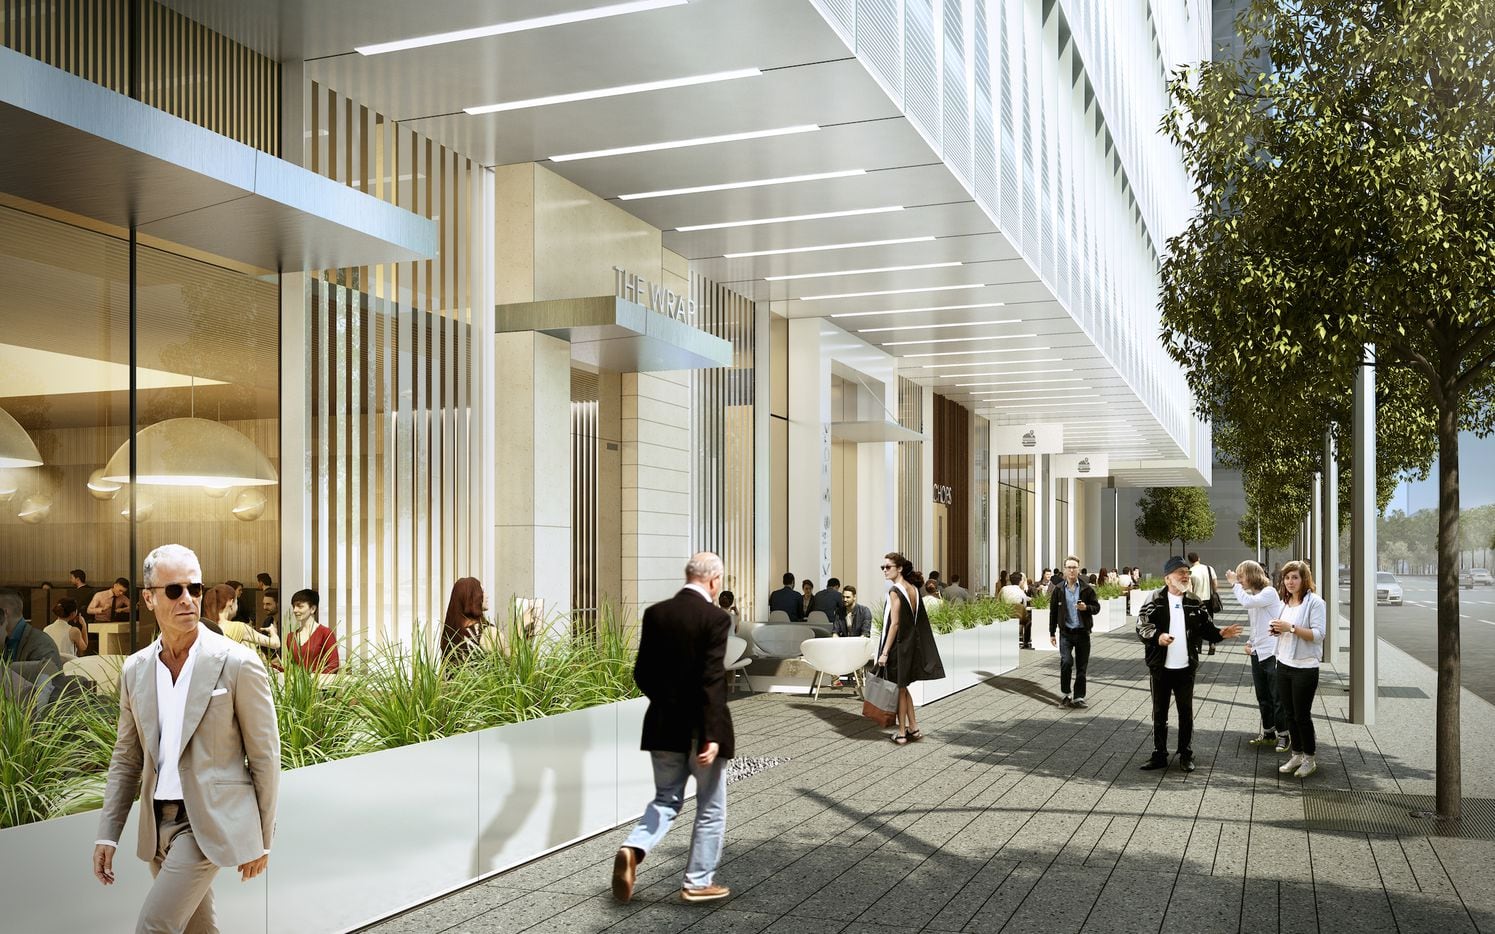 A new building across the street from Trammell Crow Center on will bring parking, a hotel...